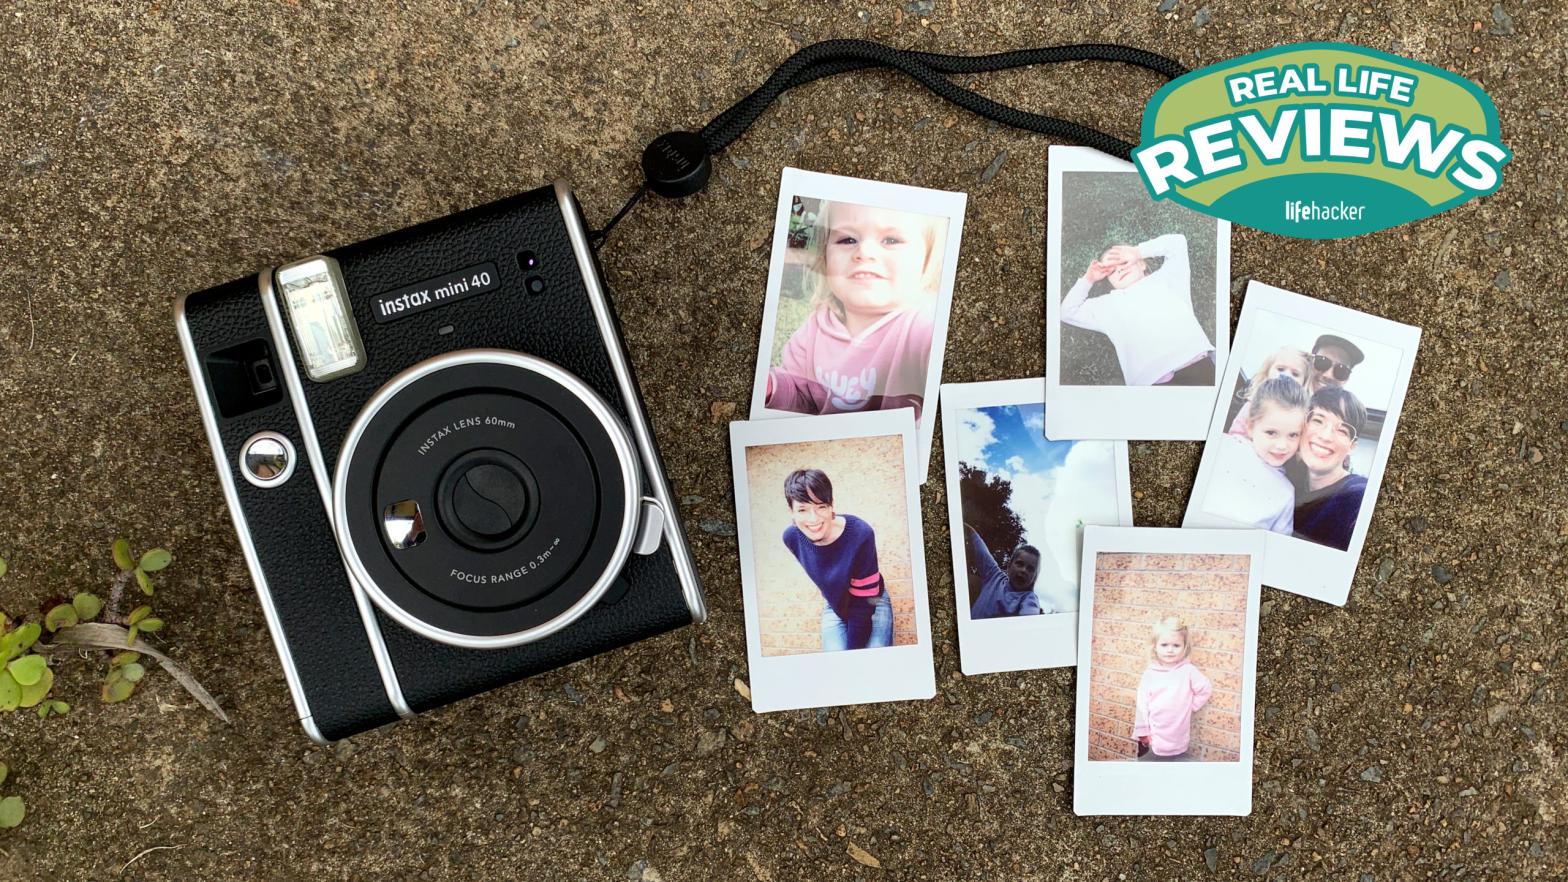 Real Life Review Instax Mini 40